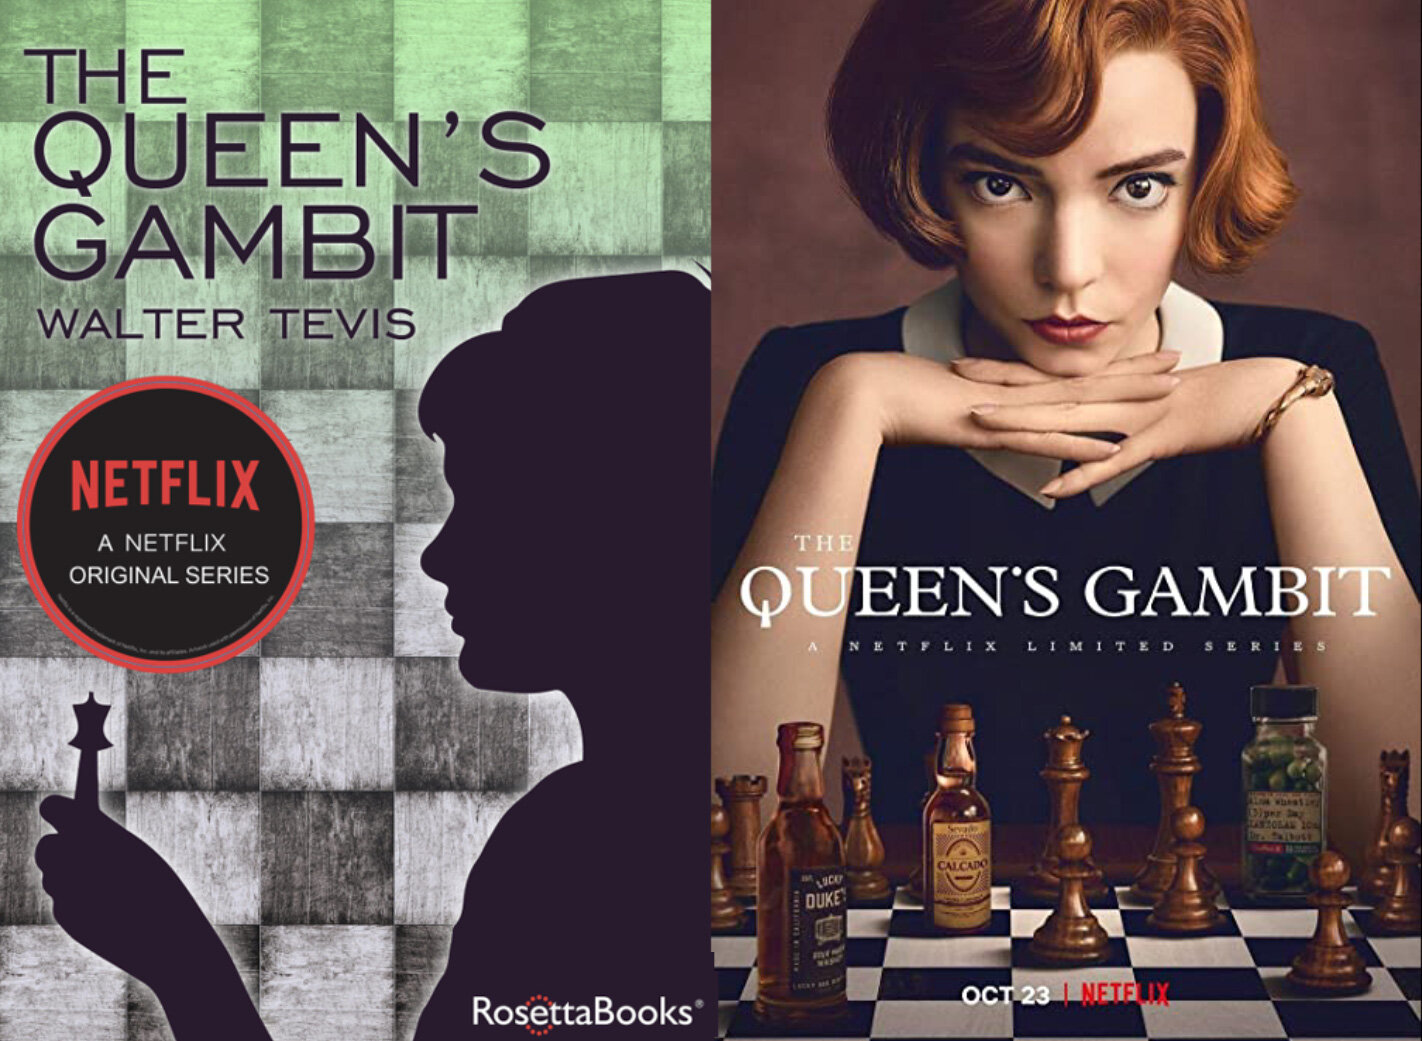 There's A Very Good Reason Why Everyone Is Watching “The Queen's Gambit”